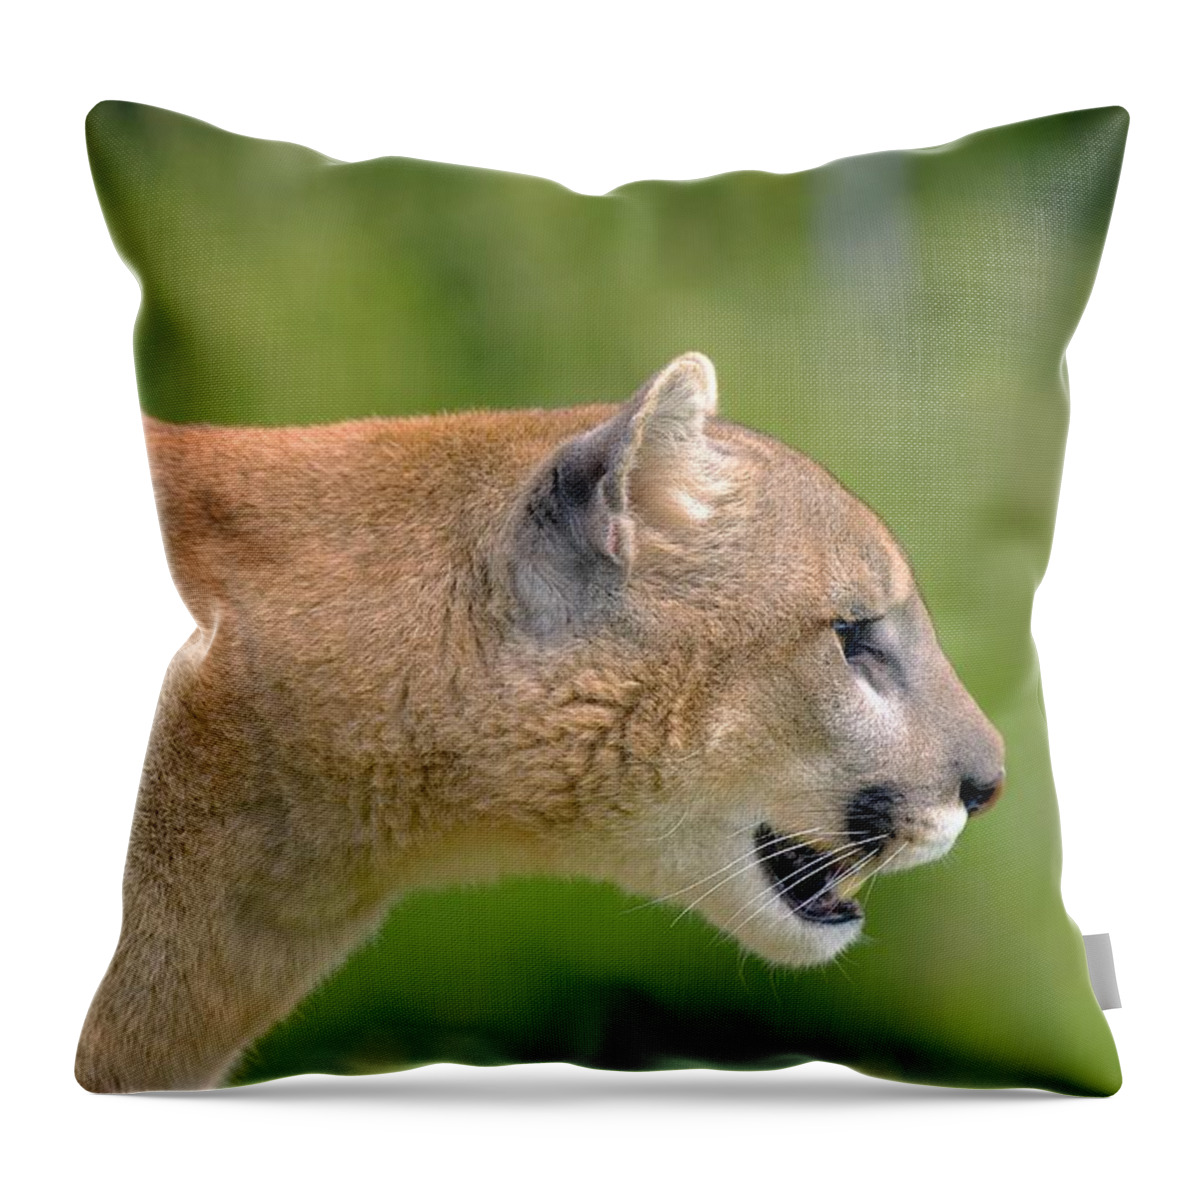 Outdoors Throw Pillow featuring the photograph Cougar Profile by John Pitcher